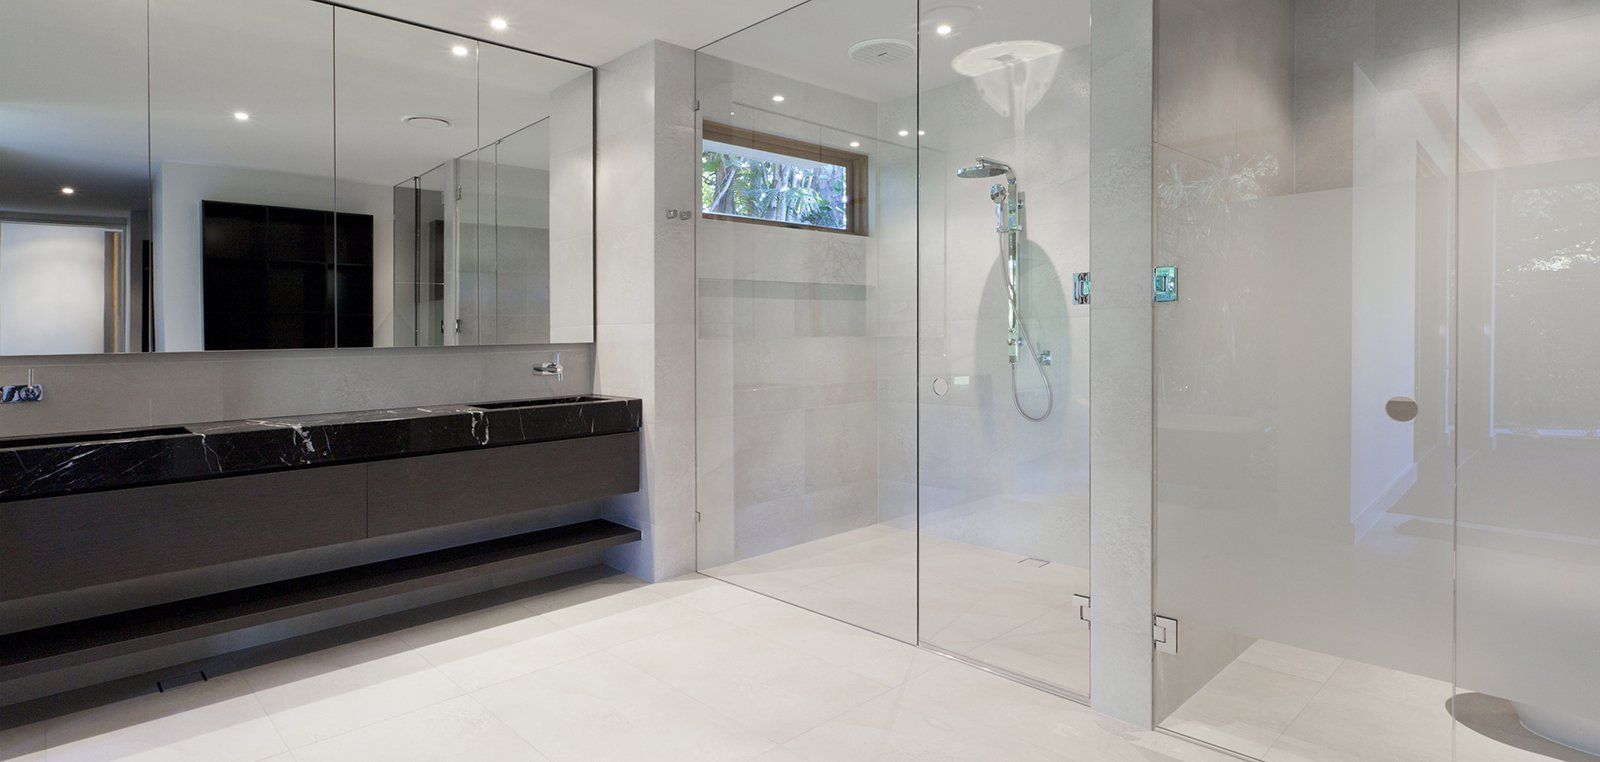 Residential shower glass enclosure